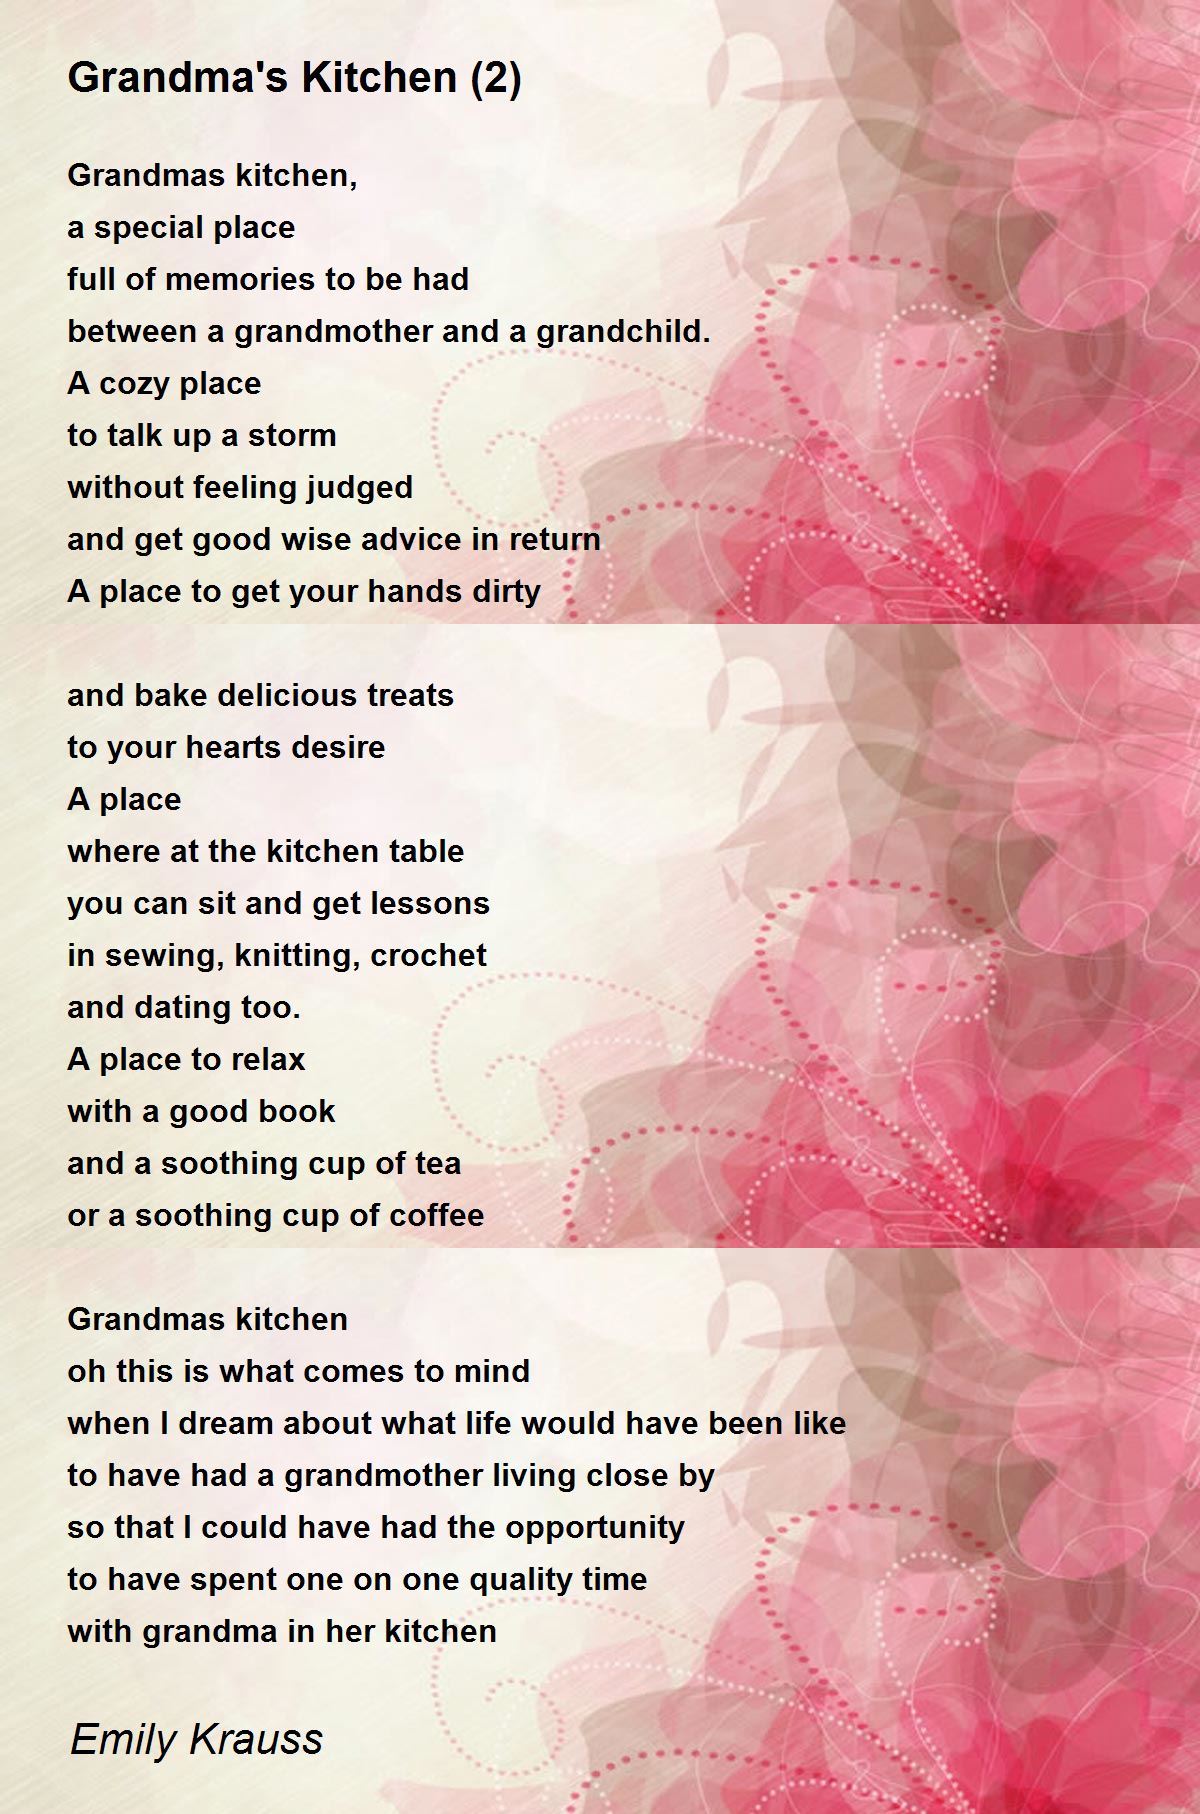 Grandma's Kitchen - a poem by PinkFaerie5 - All Poetry